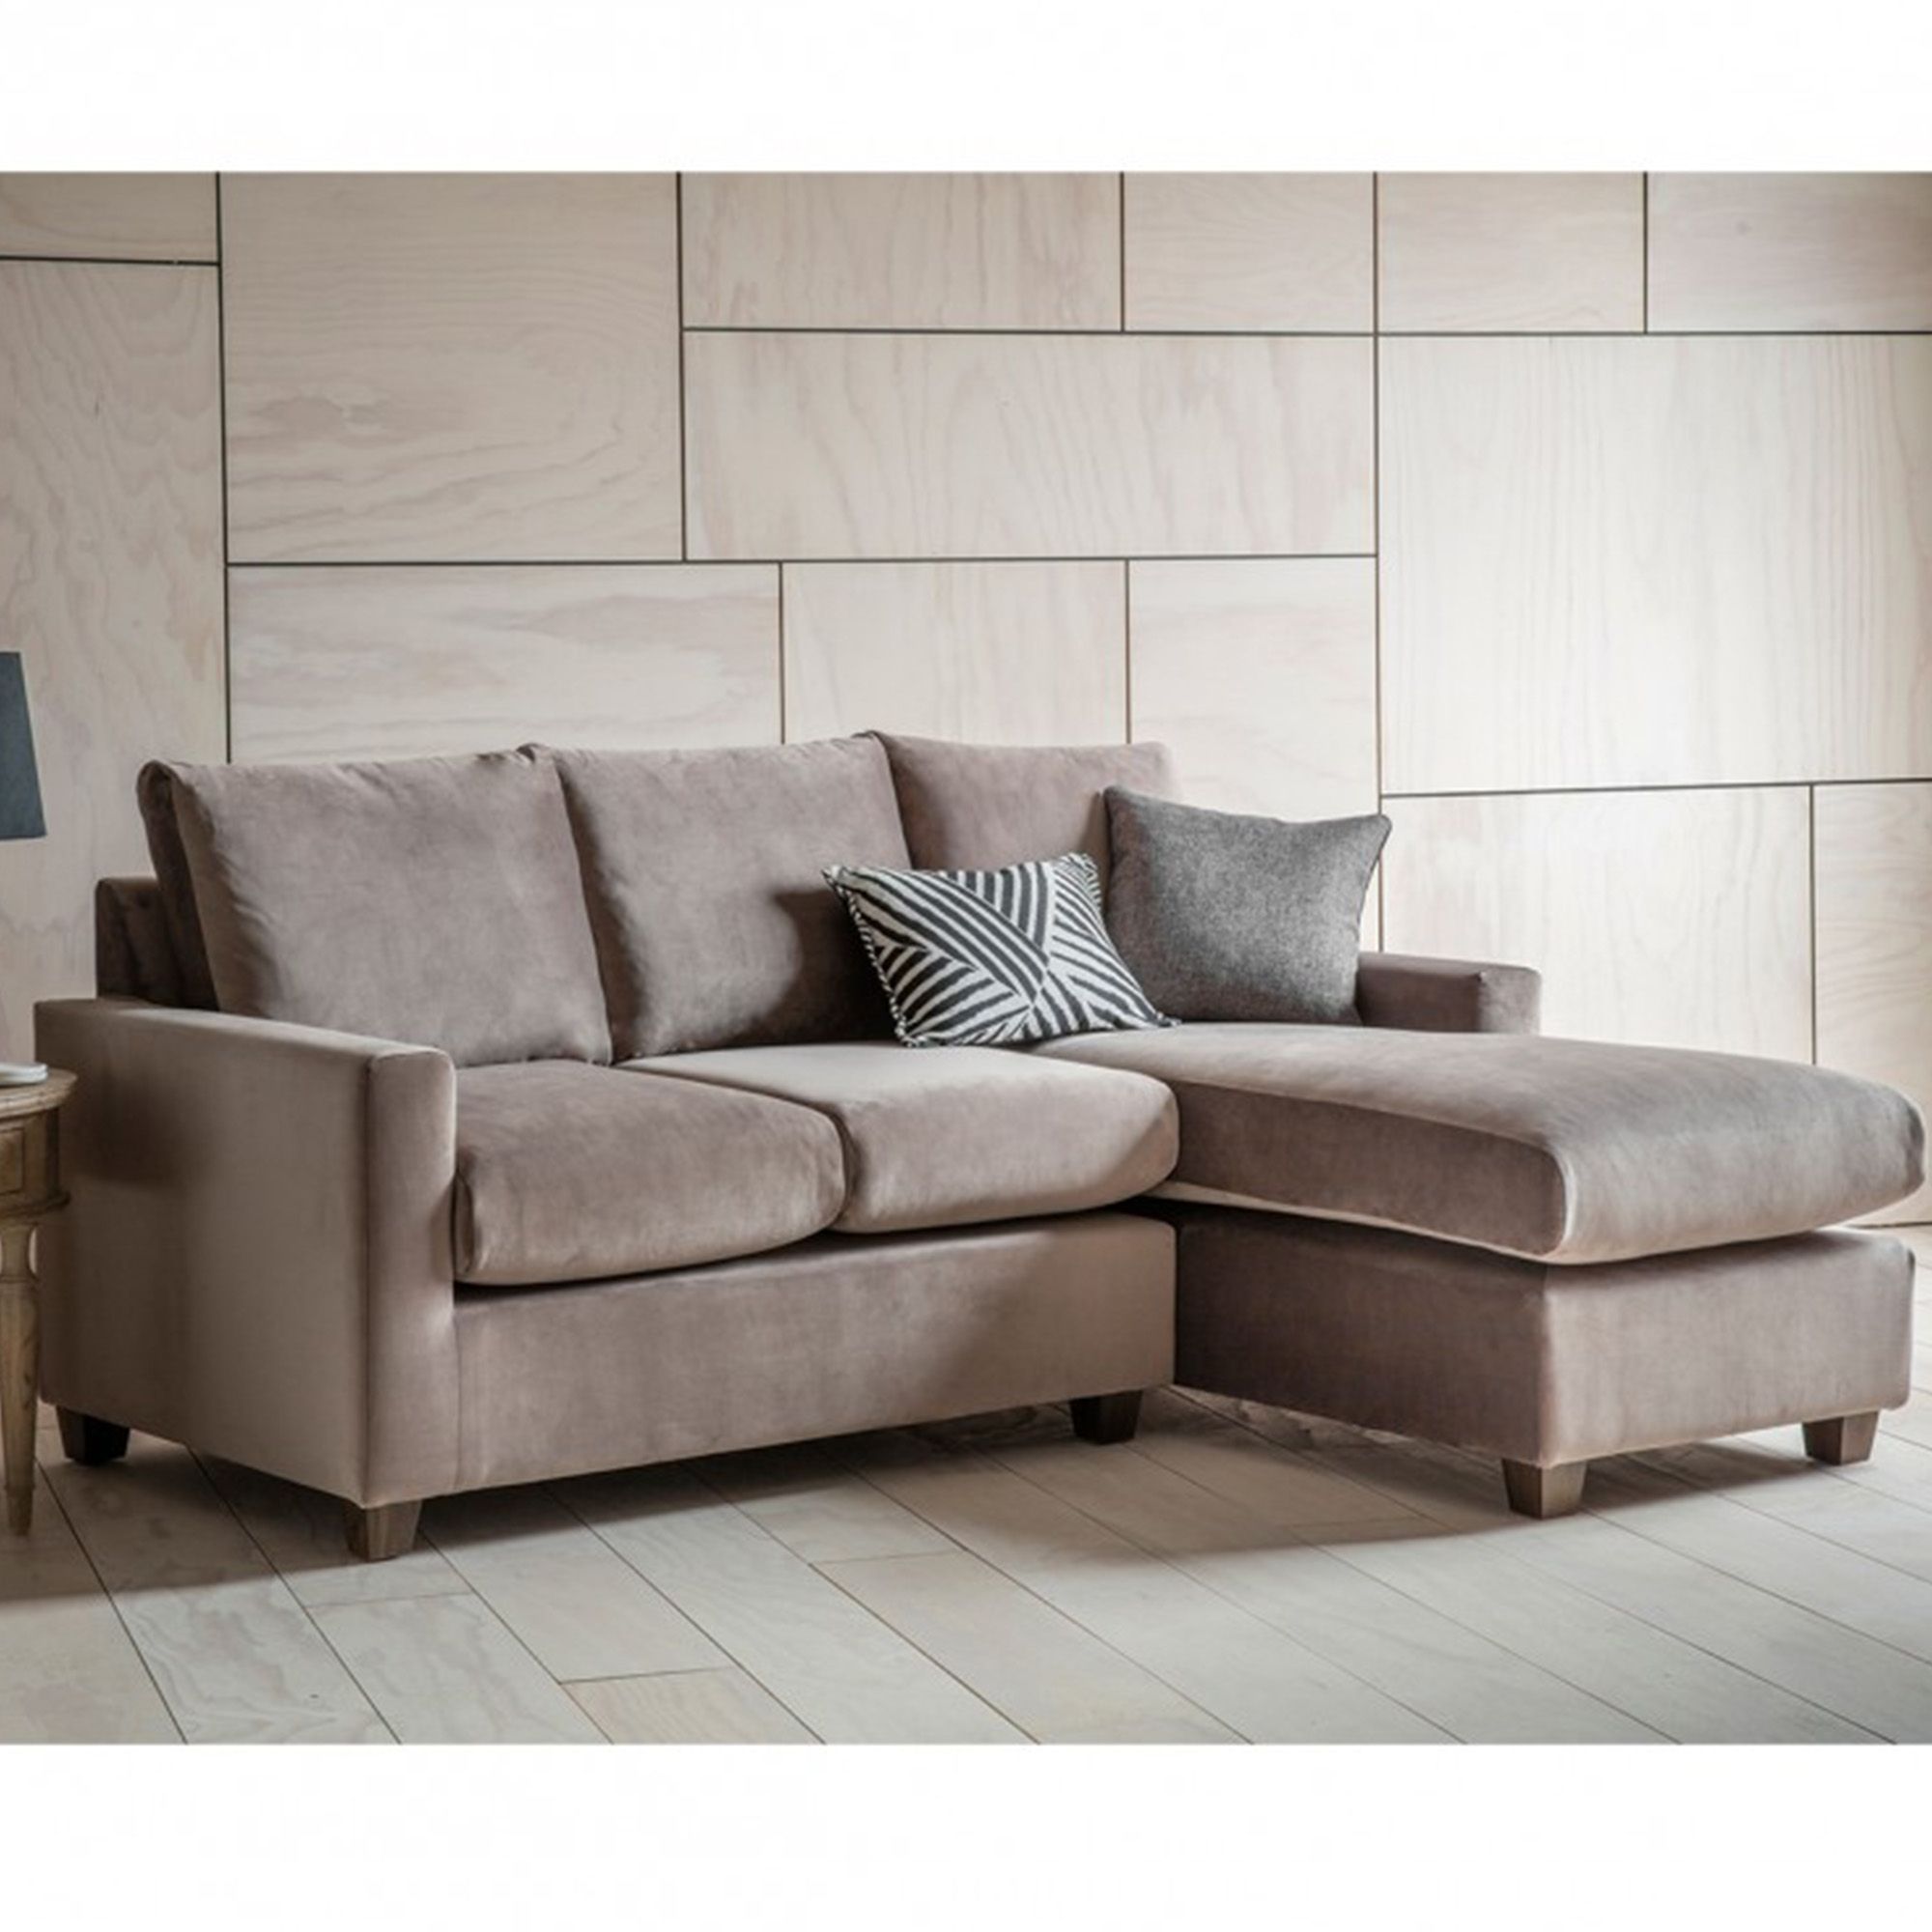 Brussels Taupe Stratford Lh Chaise Sofa | Seating Online Intended For Stratford Sofas (View 7 of 15)